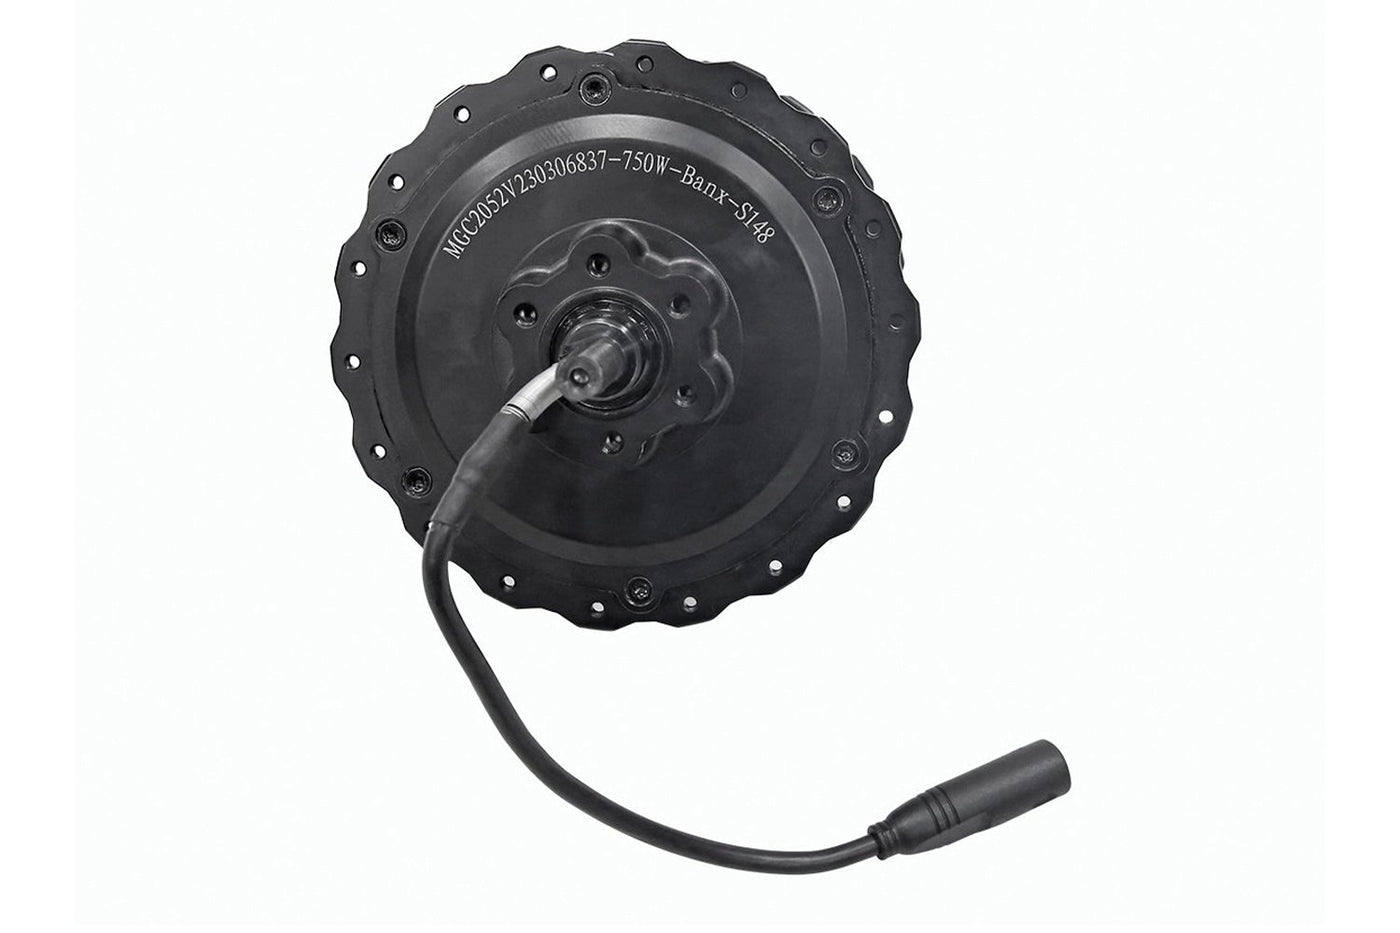 Magicycle Brushless Rear Motor